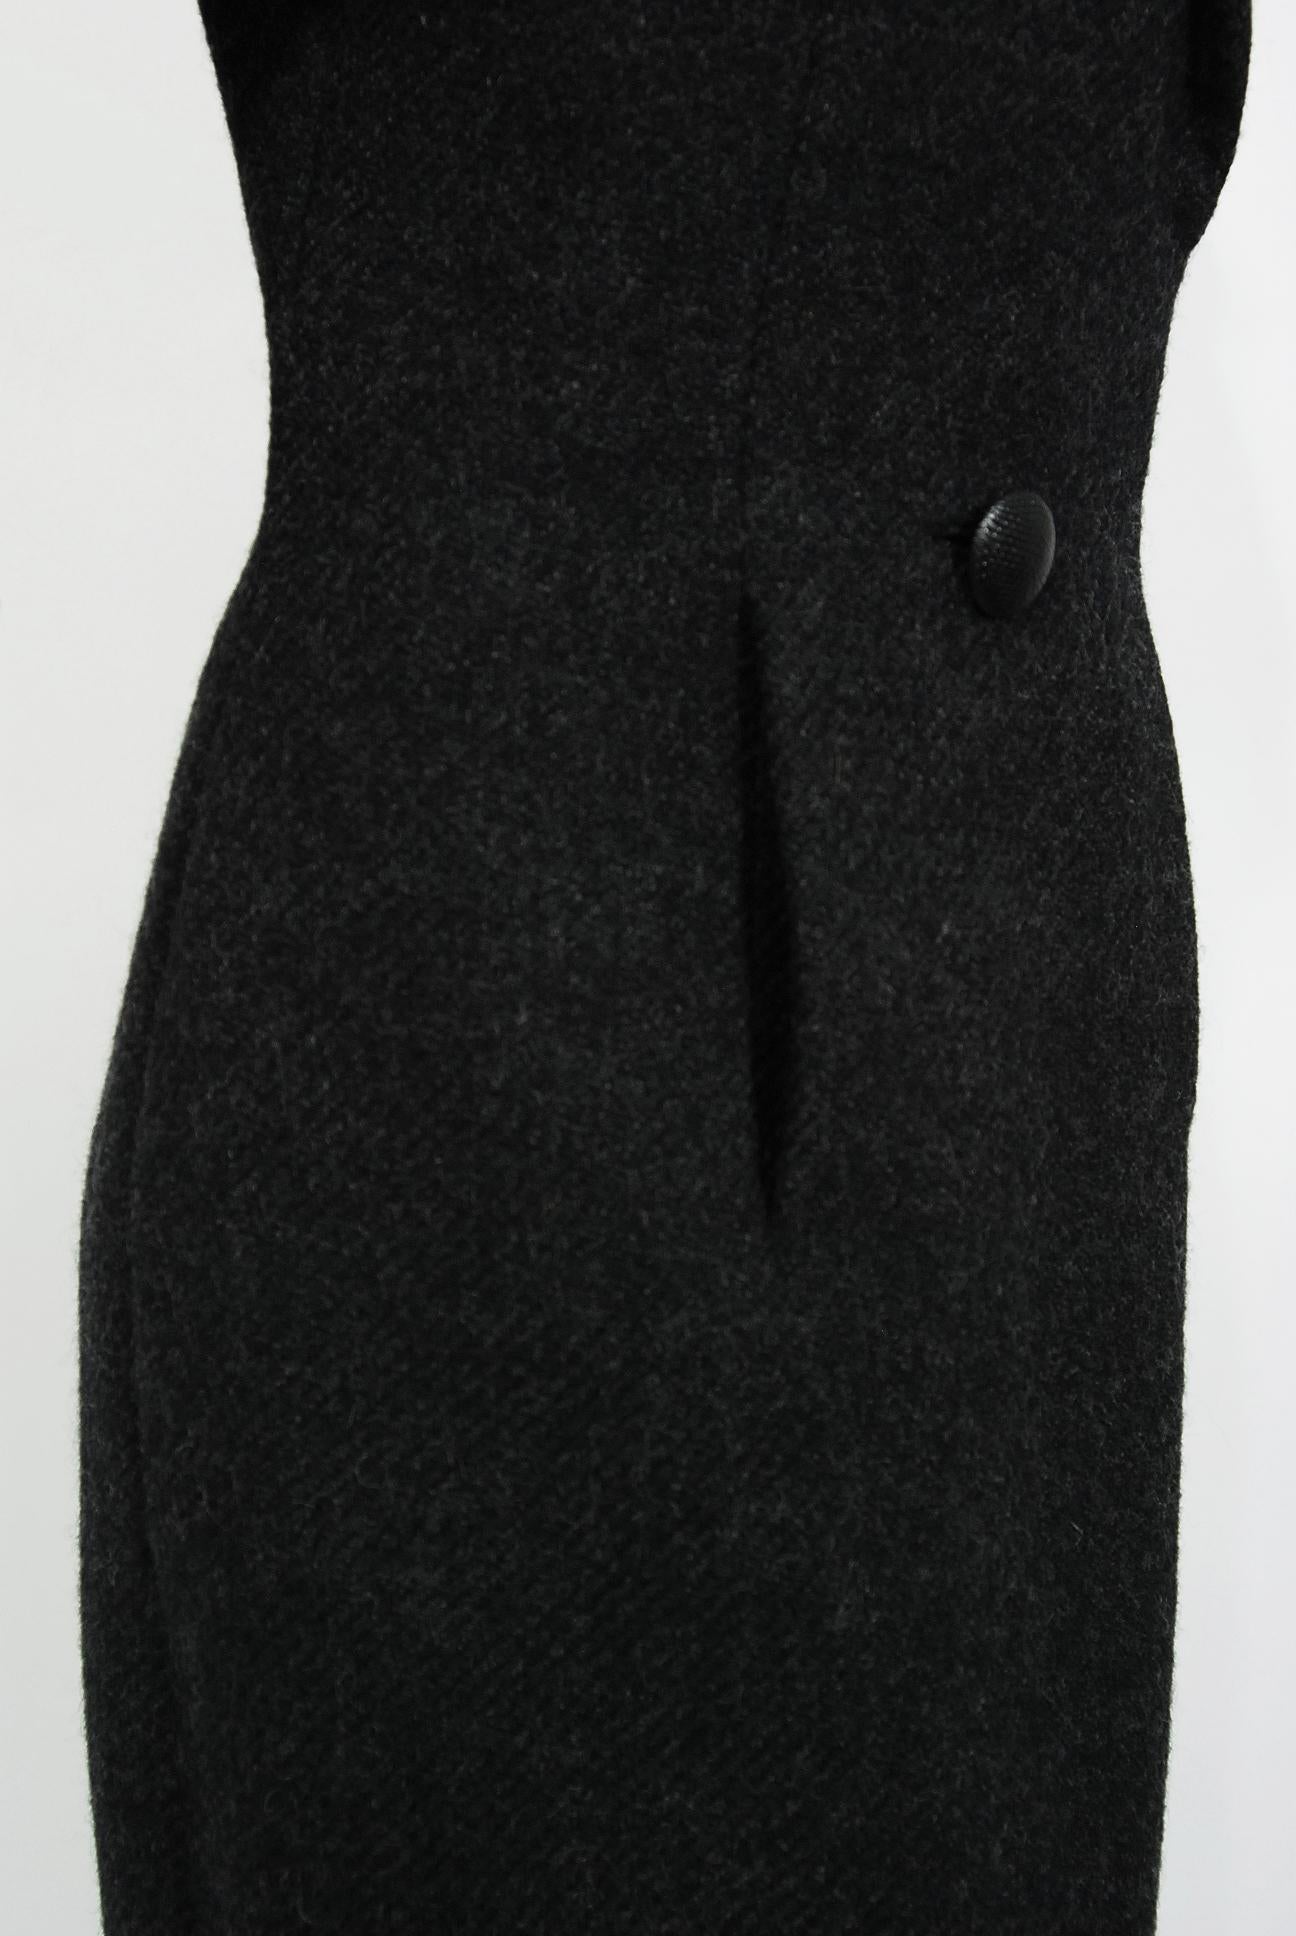 Black 1955 Christian Dior Haute Couture Documented Charcoal-Gray Wool Sheath Dress 